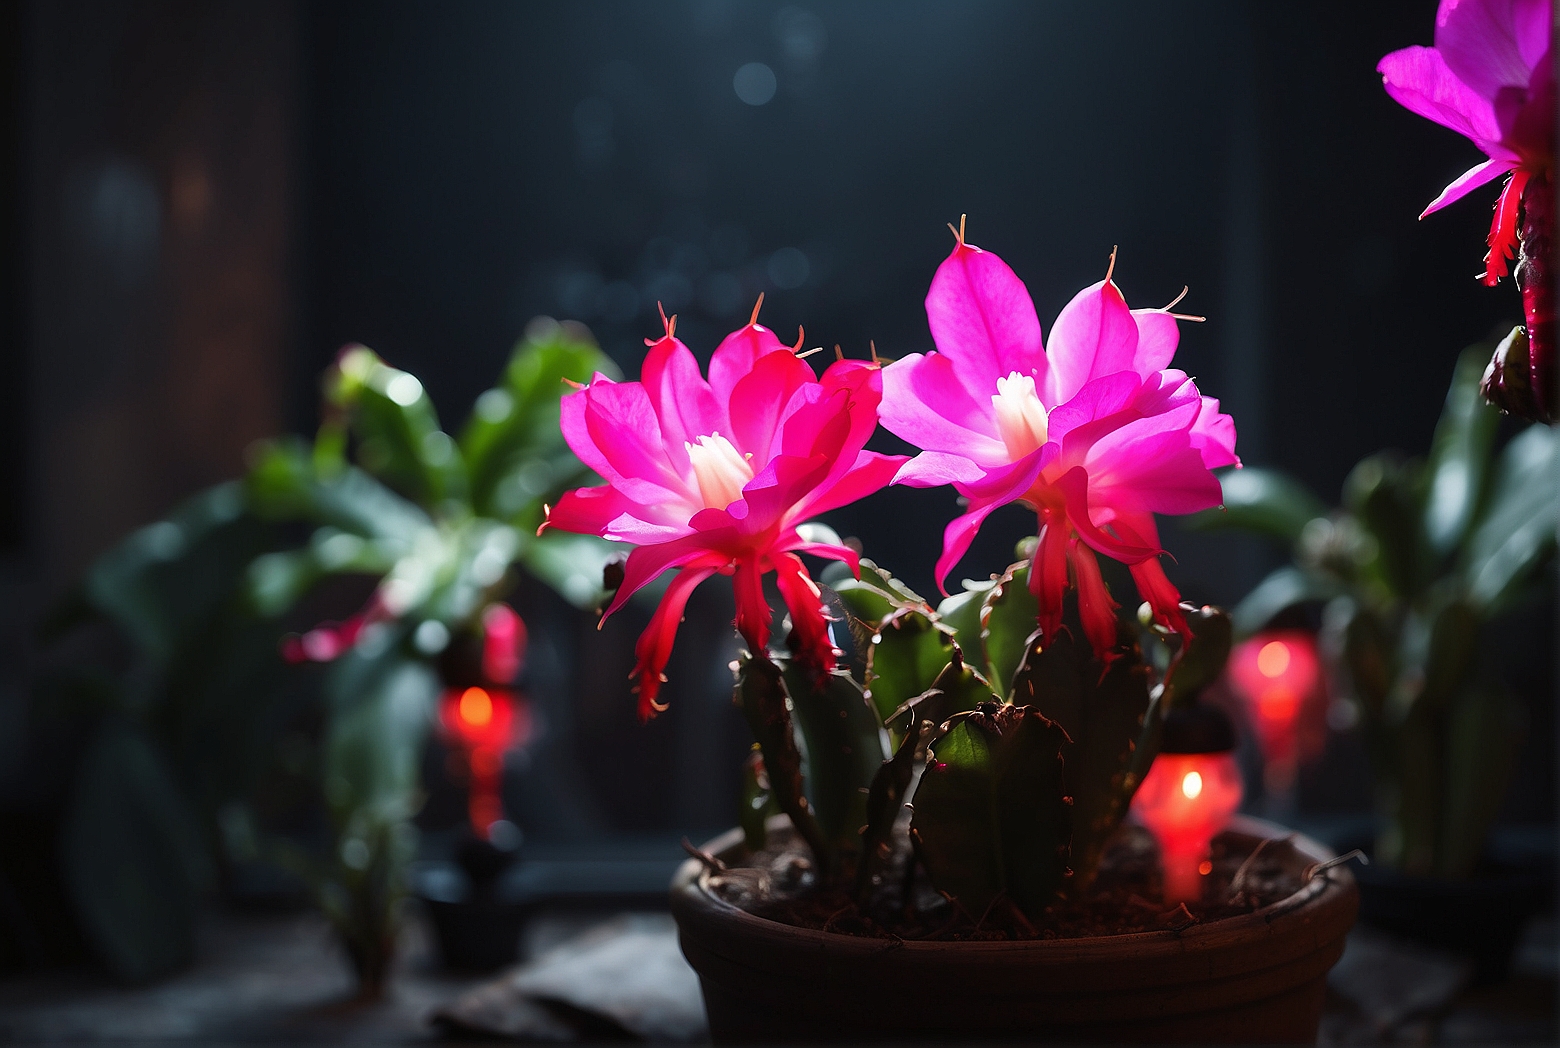 The Best Time to Place a Christmas Cactus in Darkness